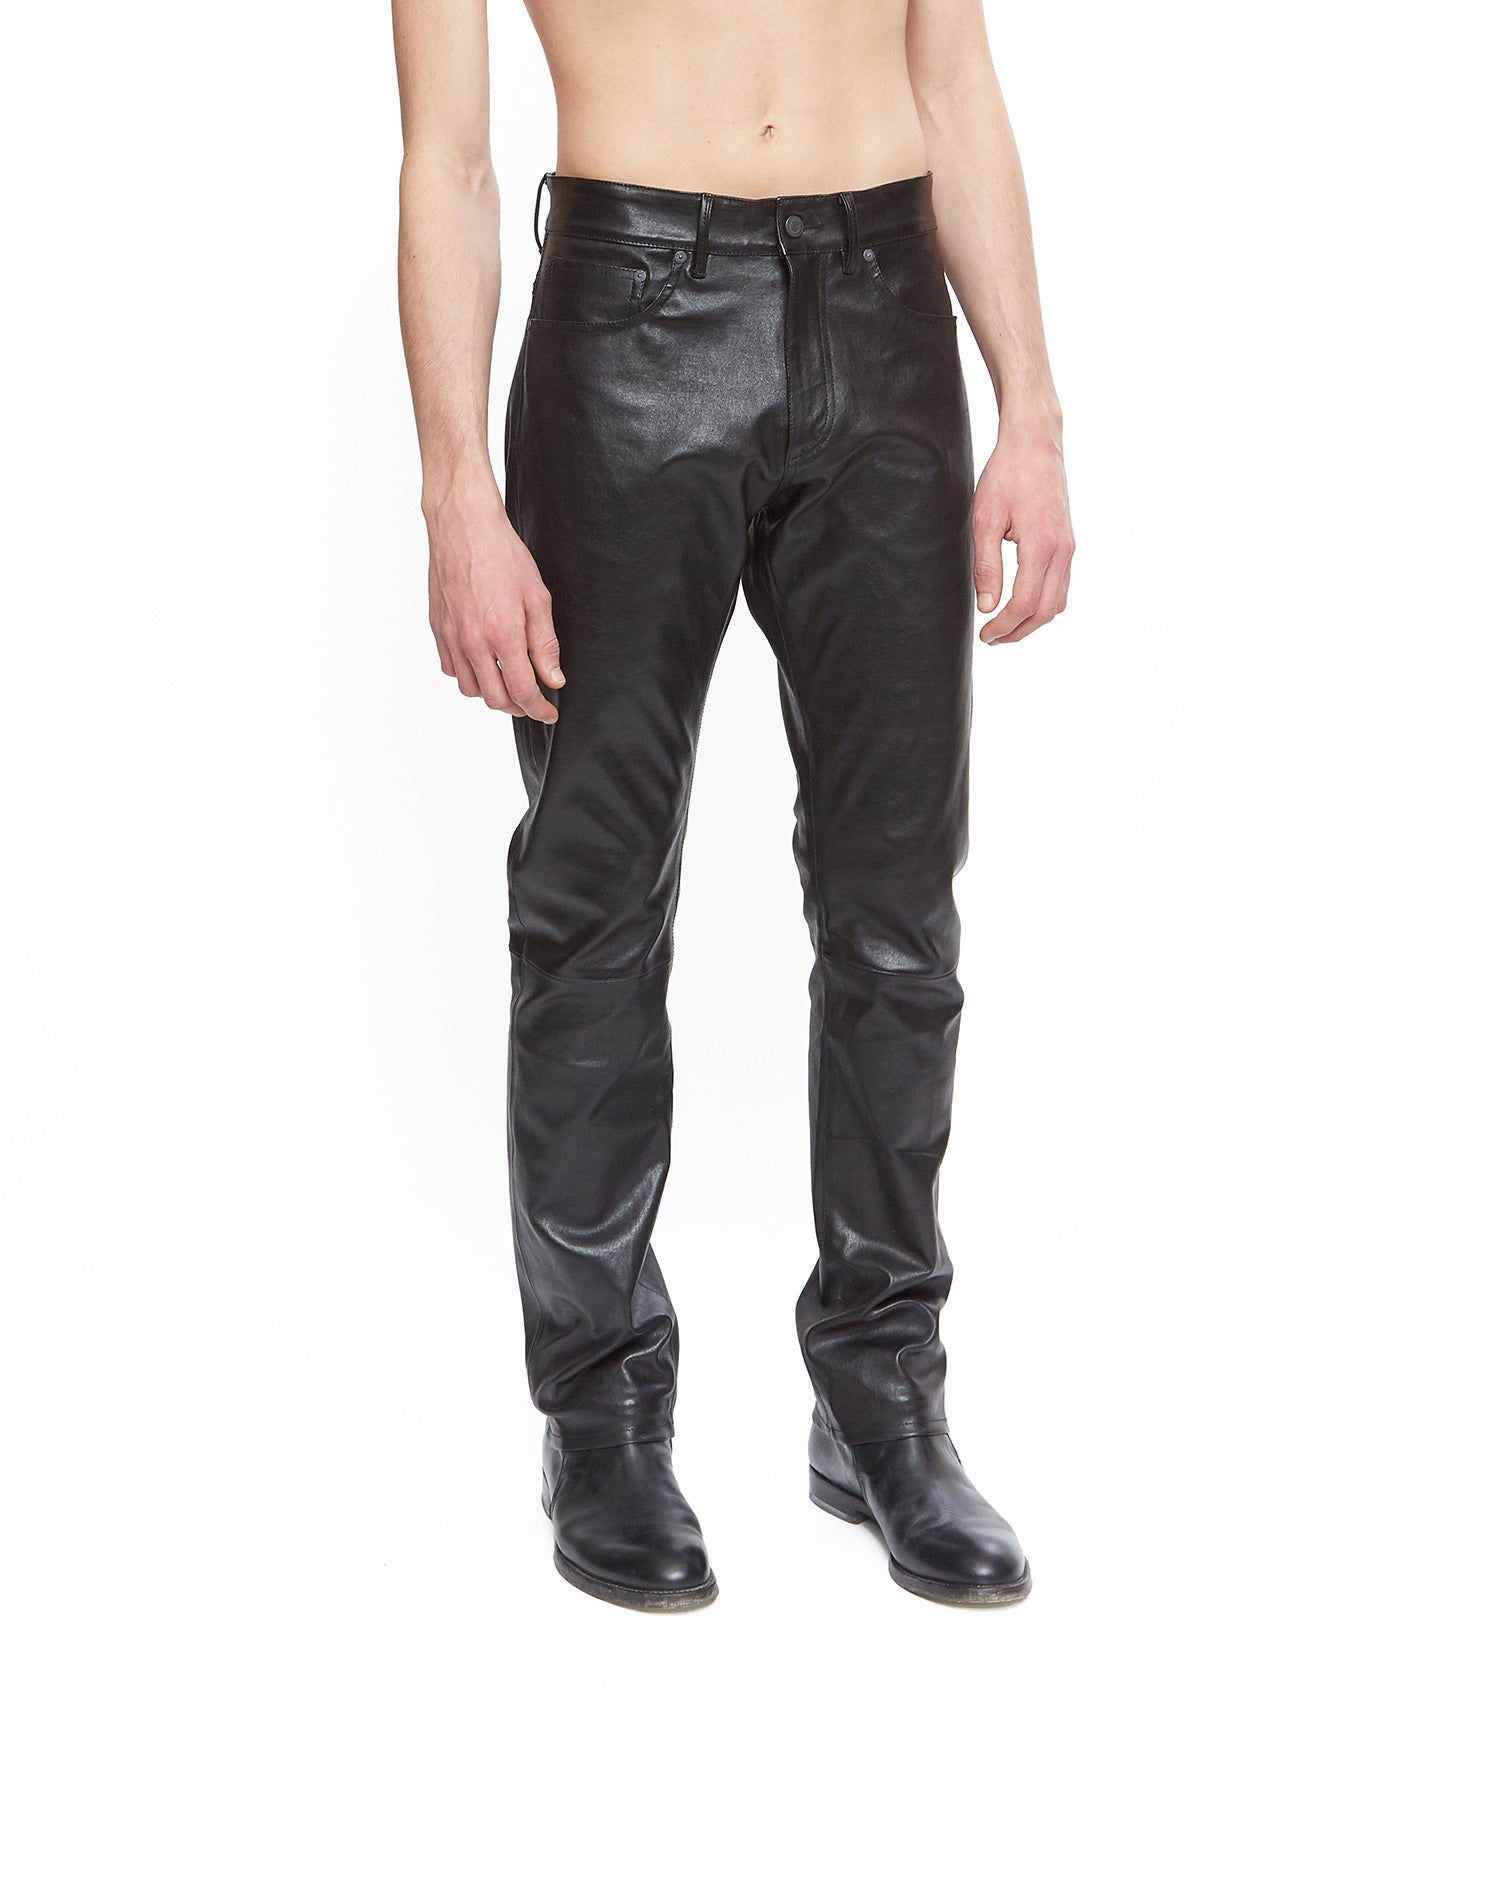 SEAN LEATHER PANTS Leather pants, skinny fit, hidden front zip closure. 100% leather. Made in Italy HTC LOS ANGELES